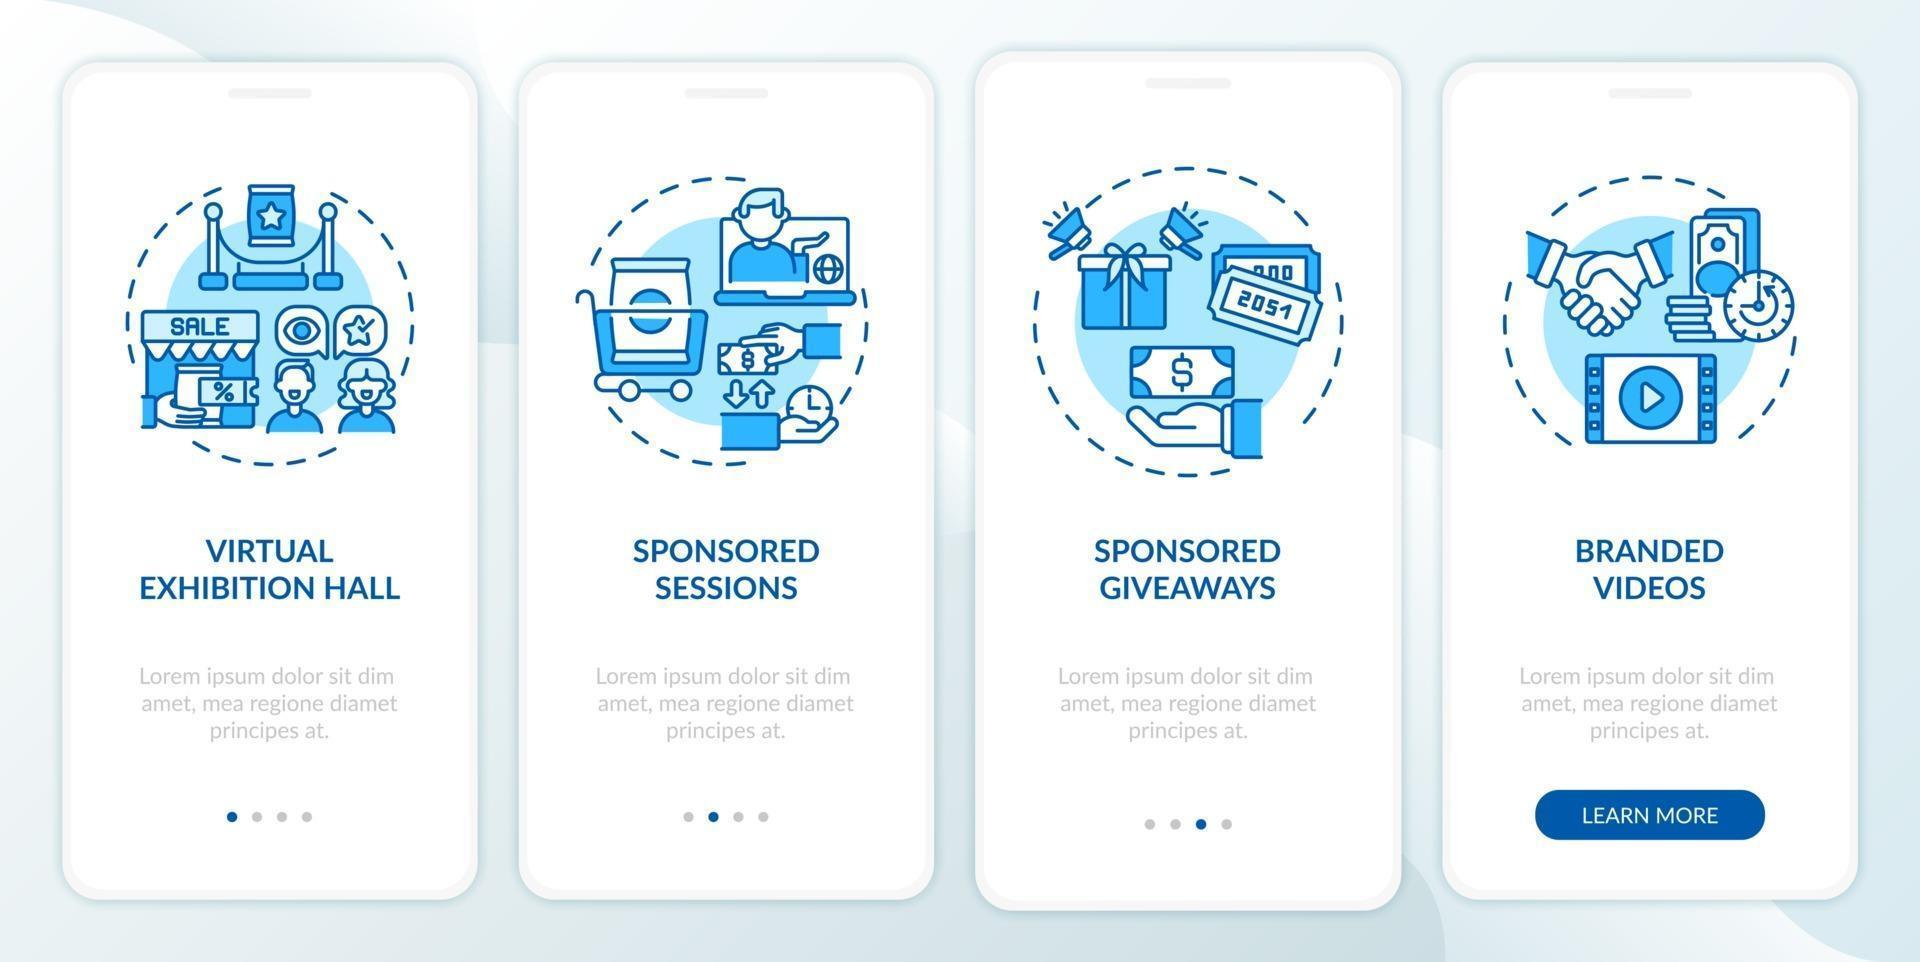 Sponsorship remote events ideas onboarding mobile app page screen with concepts vector